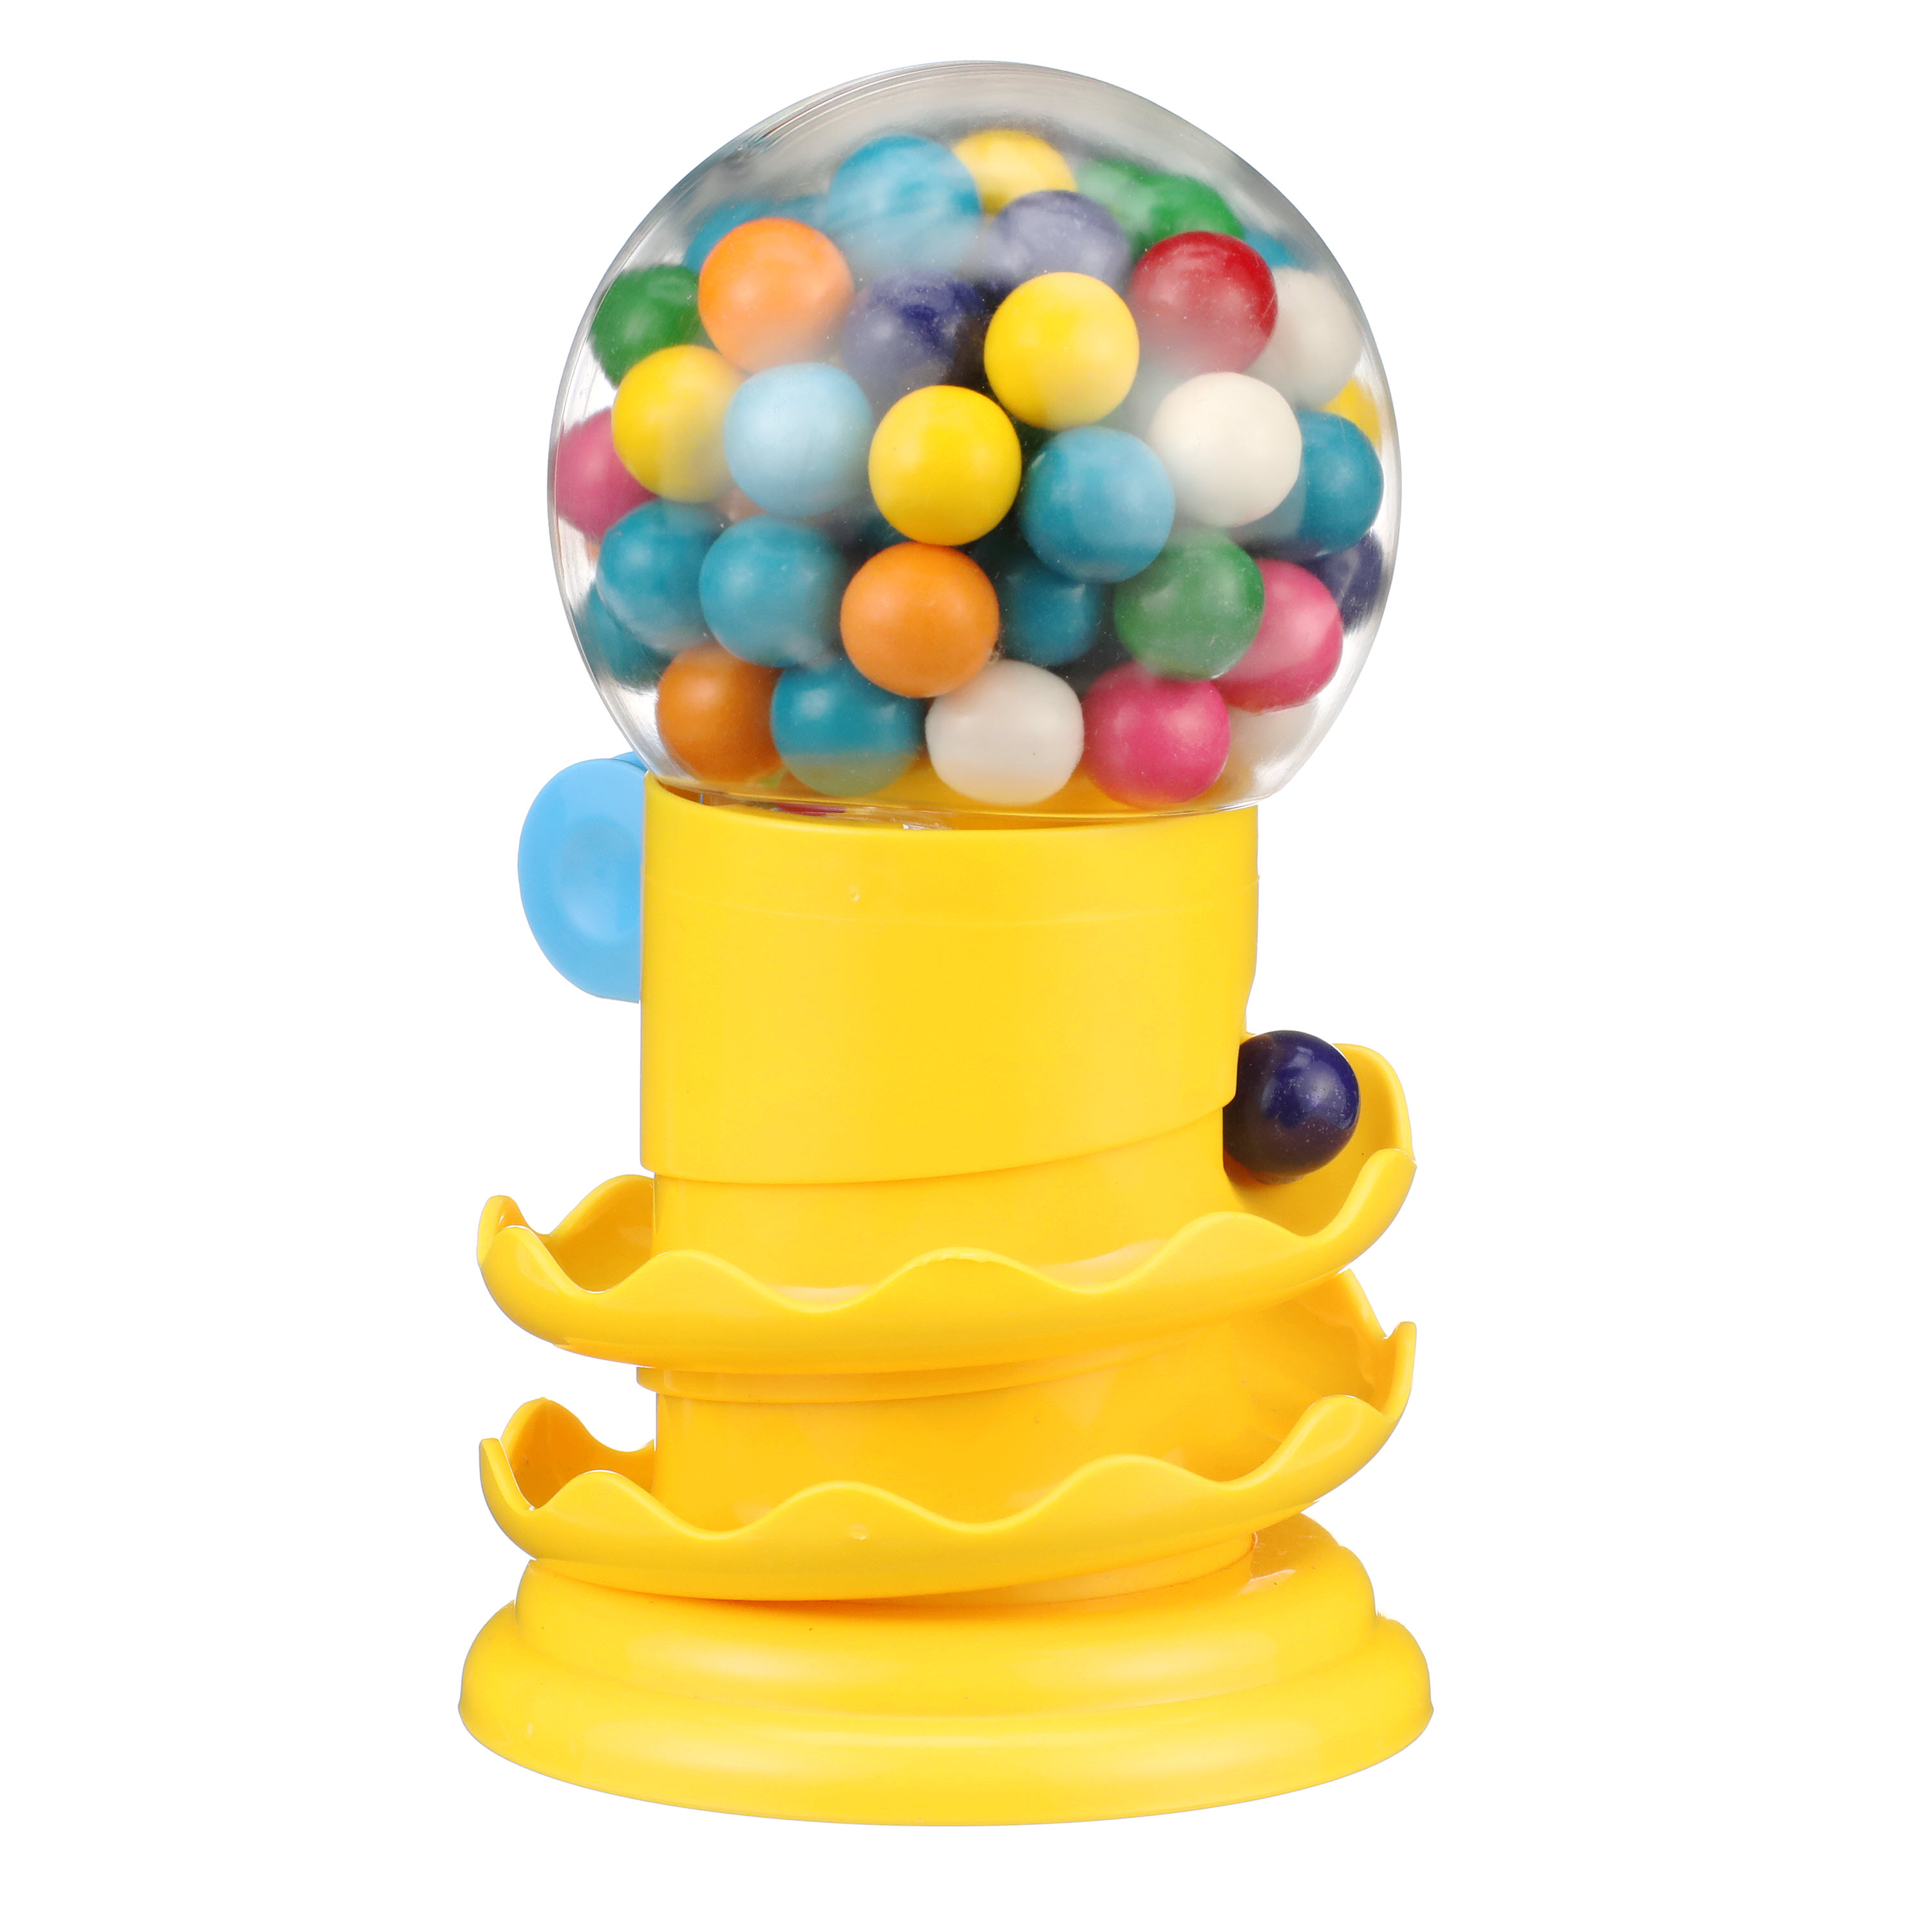 Gumball Machine Maker – Speckled Frog Toys & Books